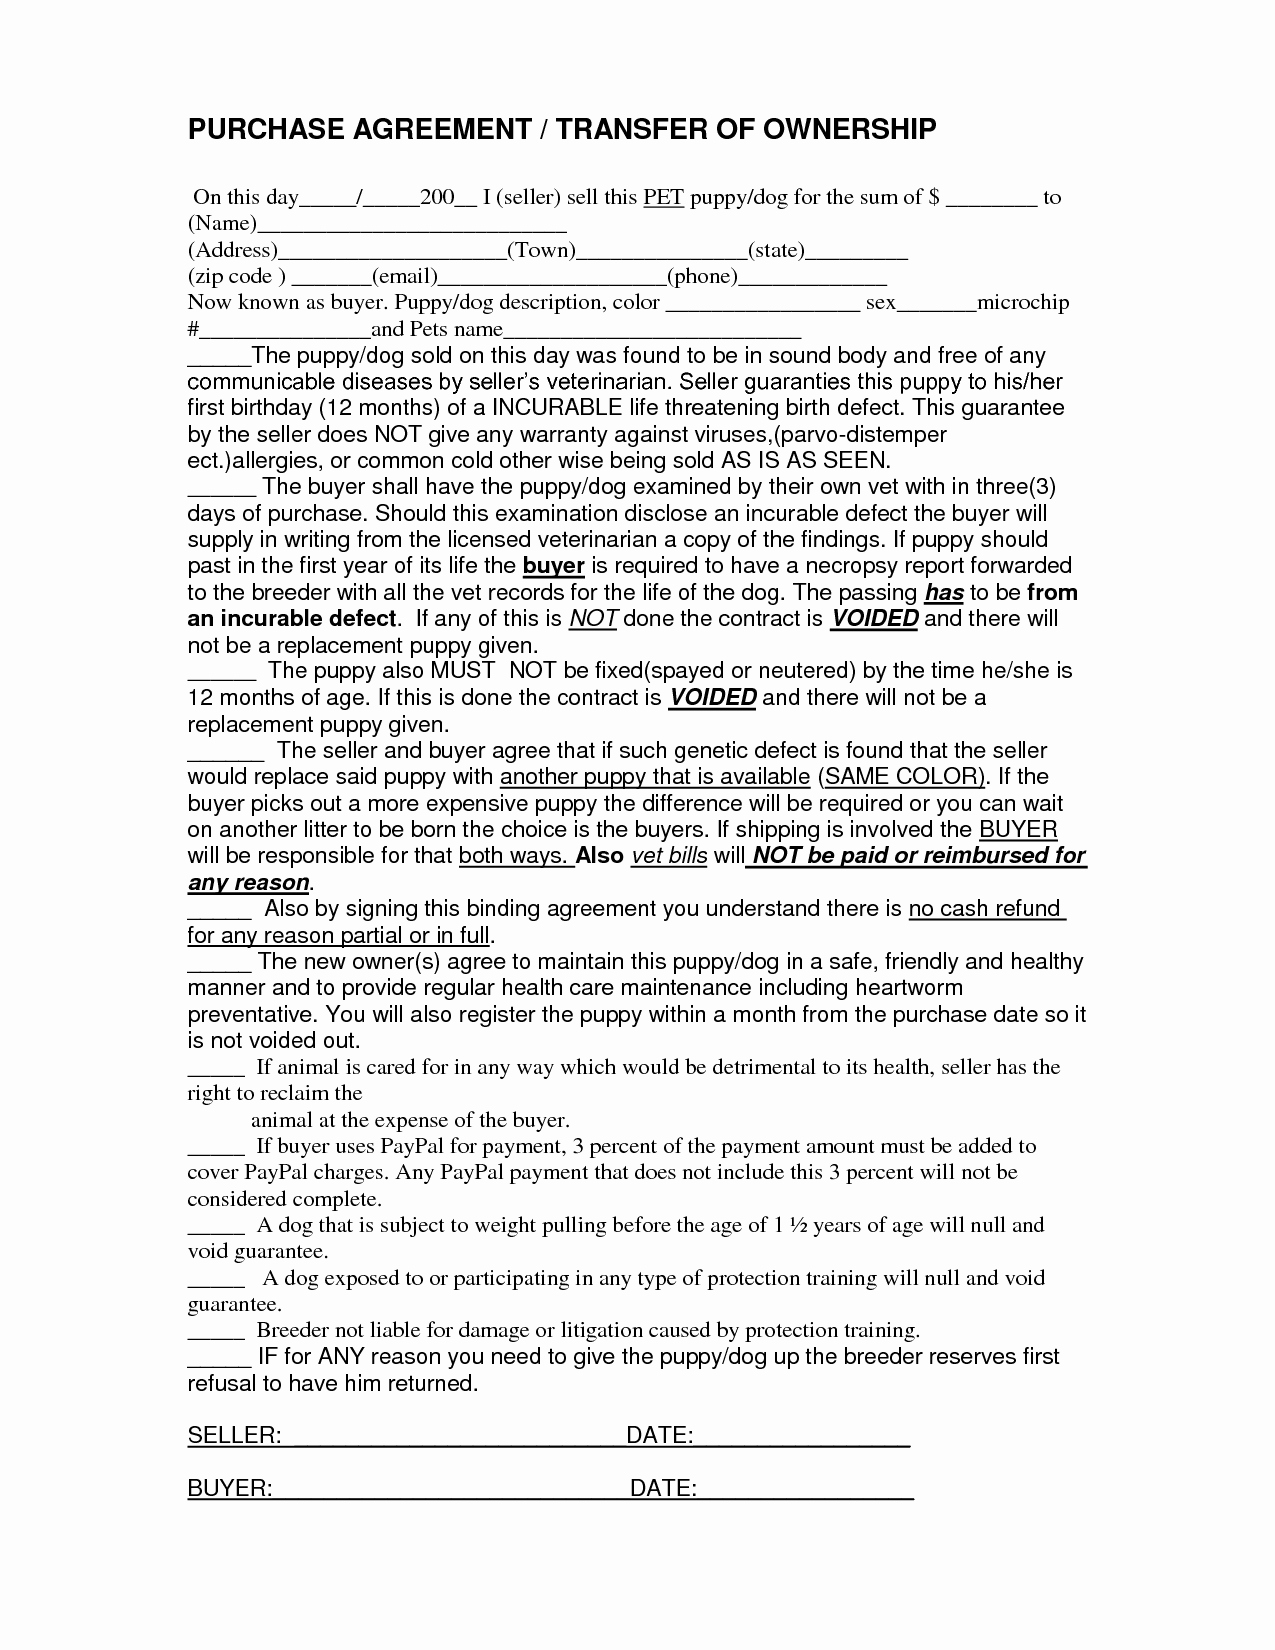 Free Real Estate Contract Awesome for Sale by Owner Purchase Agreement